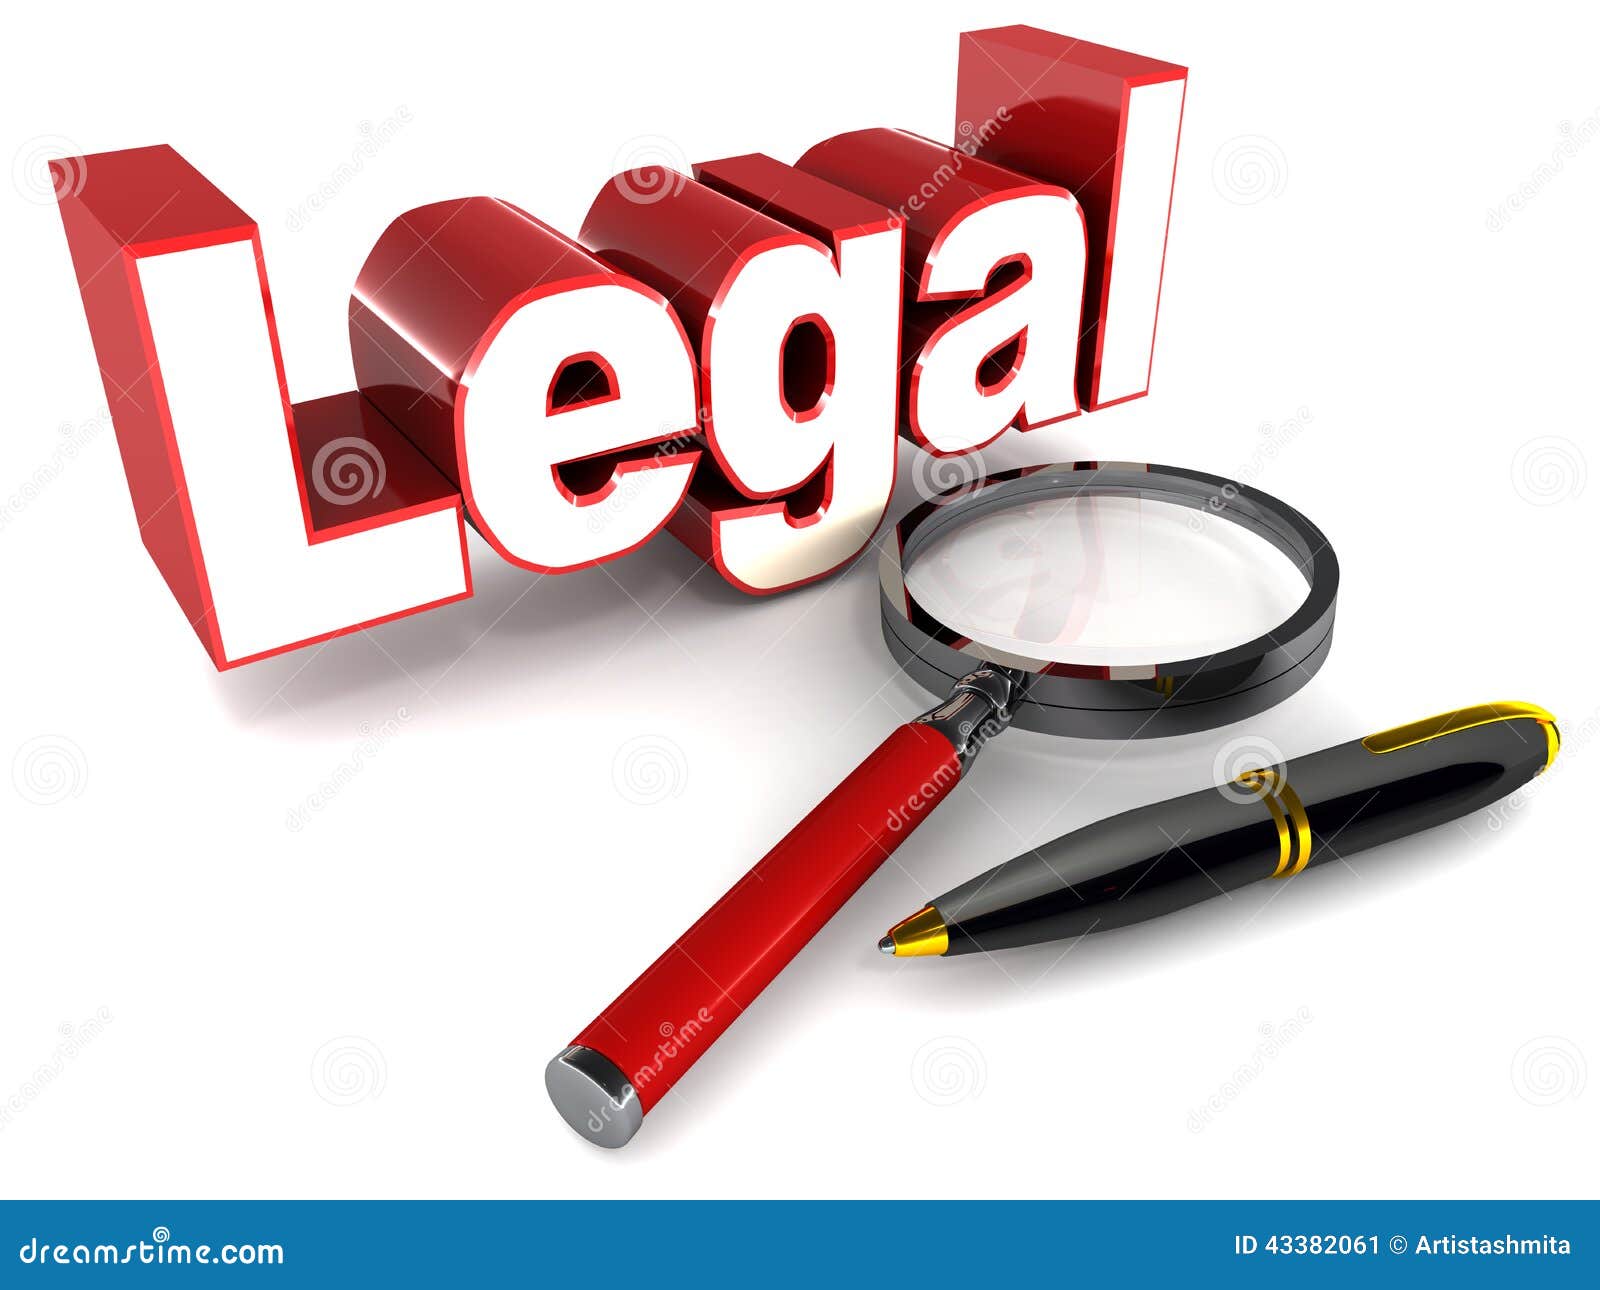 funny legal clipart - photo #25